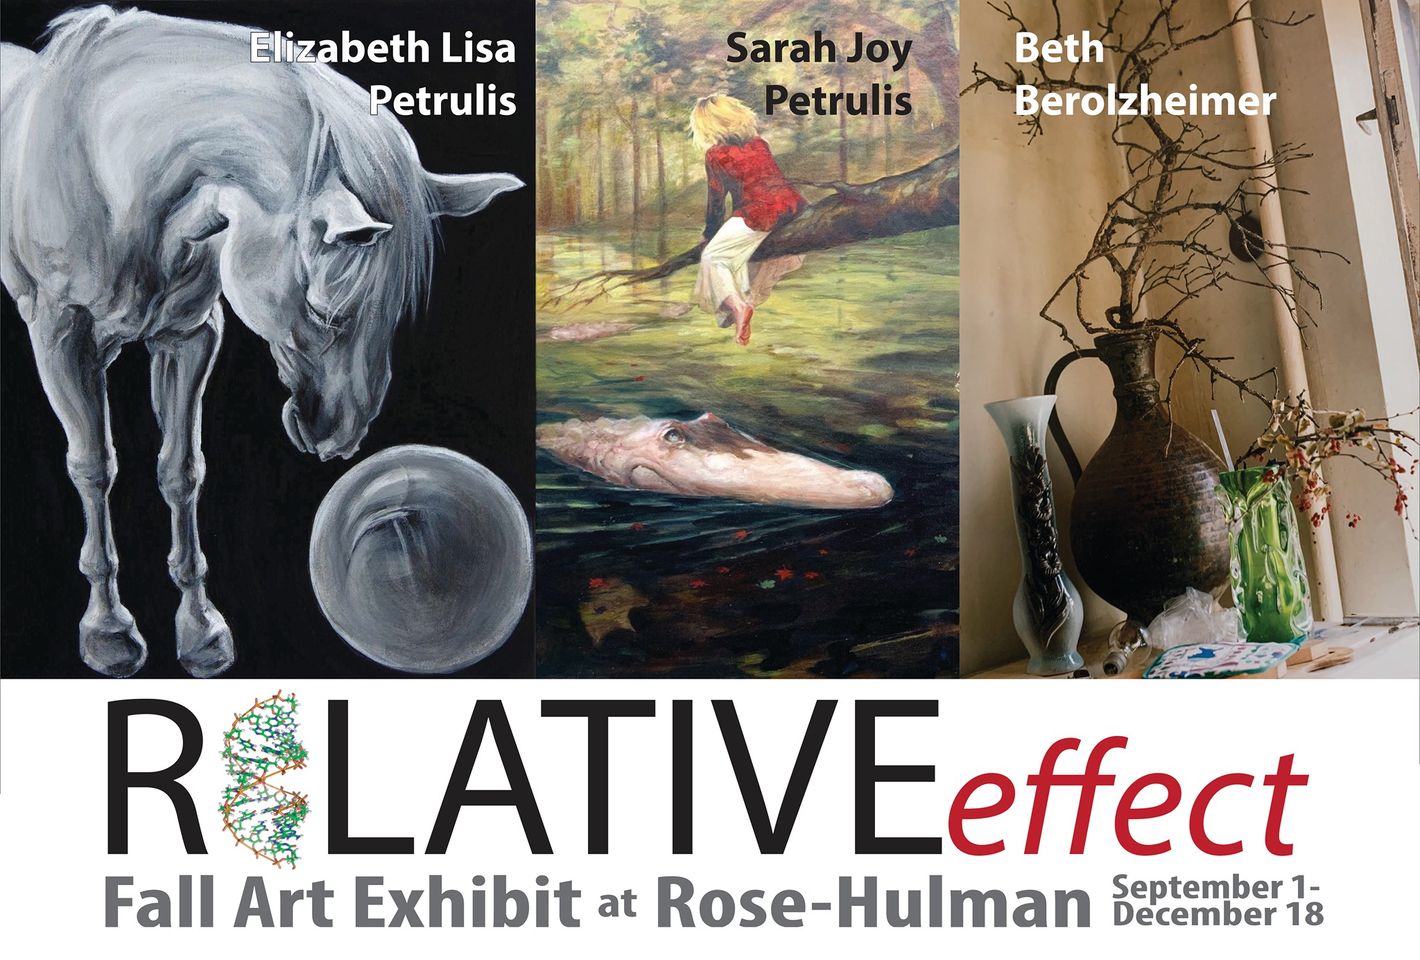 Postcard for the Exhibition "Relative Effect" featuring artwork by Elizabeth Lisa Petrulis, Sarah Joy Petrulis, and Beth Berolzheimer at Rose-Hulman Institute of Technology in Terre Haute, IN, September 1- December 18, 2020